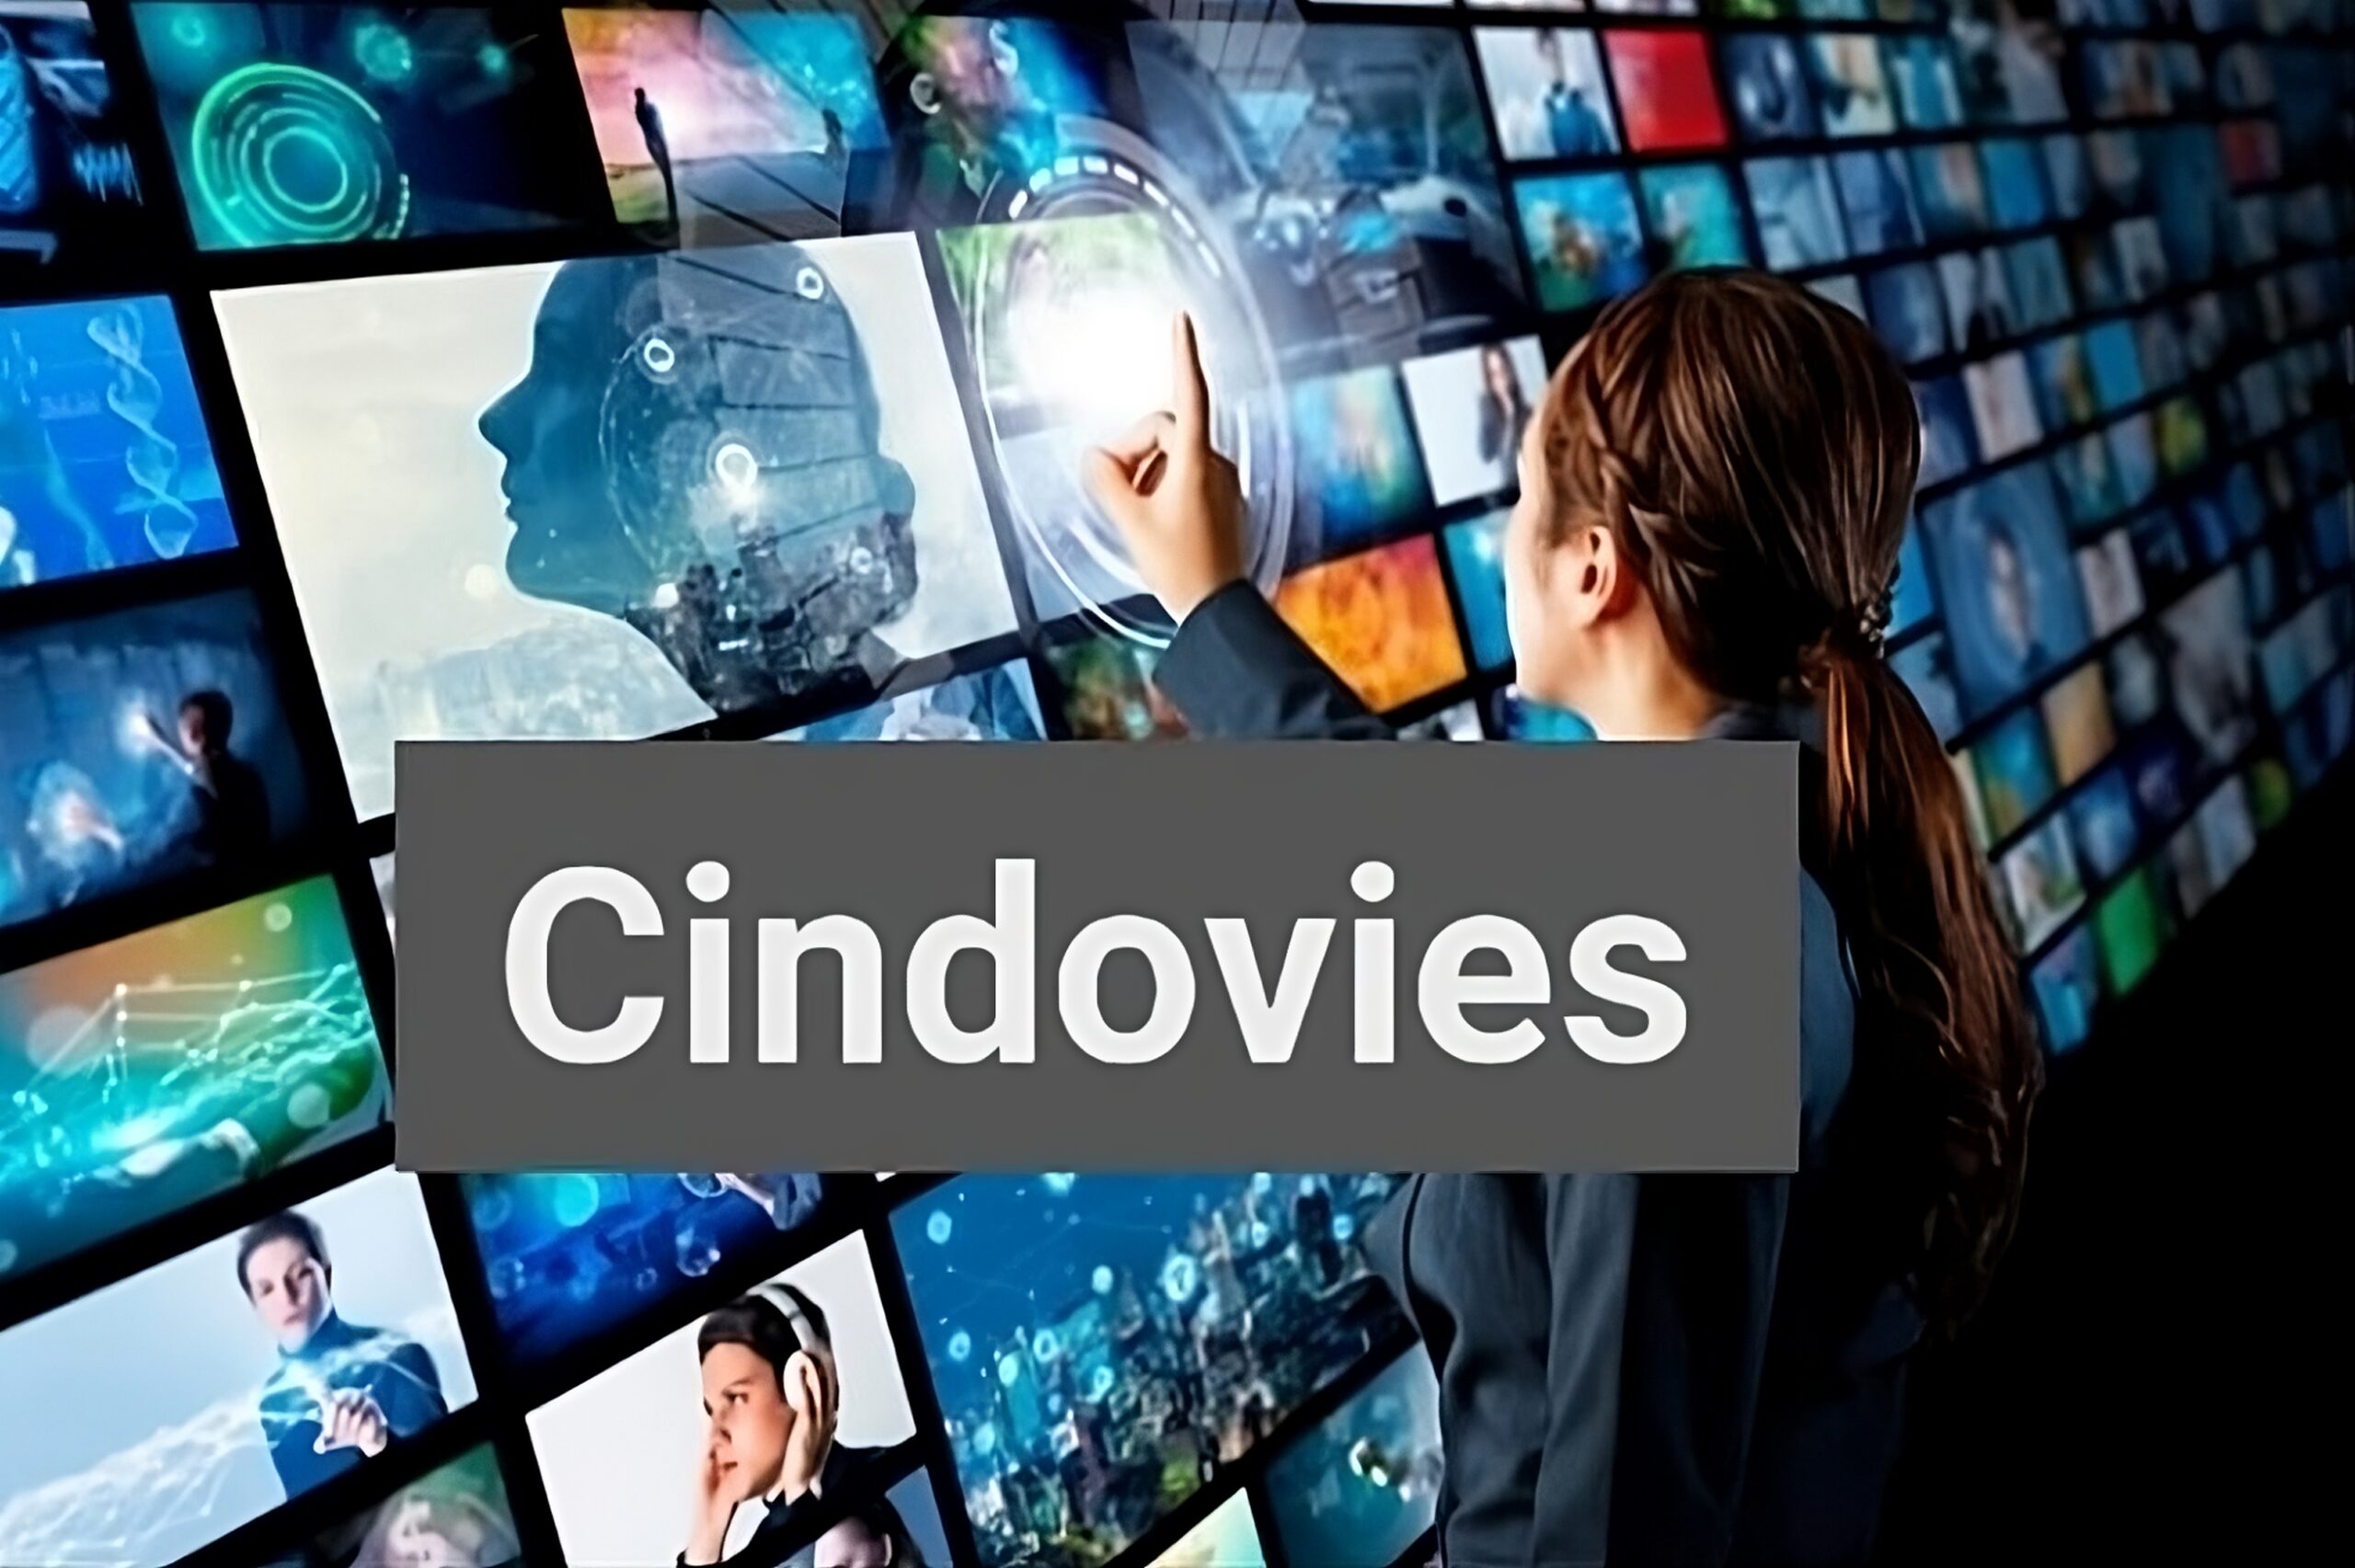 Cindovies: A Cinematic Revolution in the Digital Age